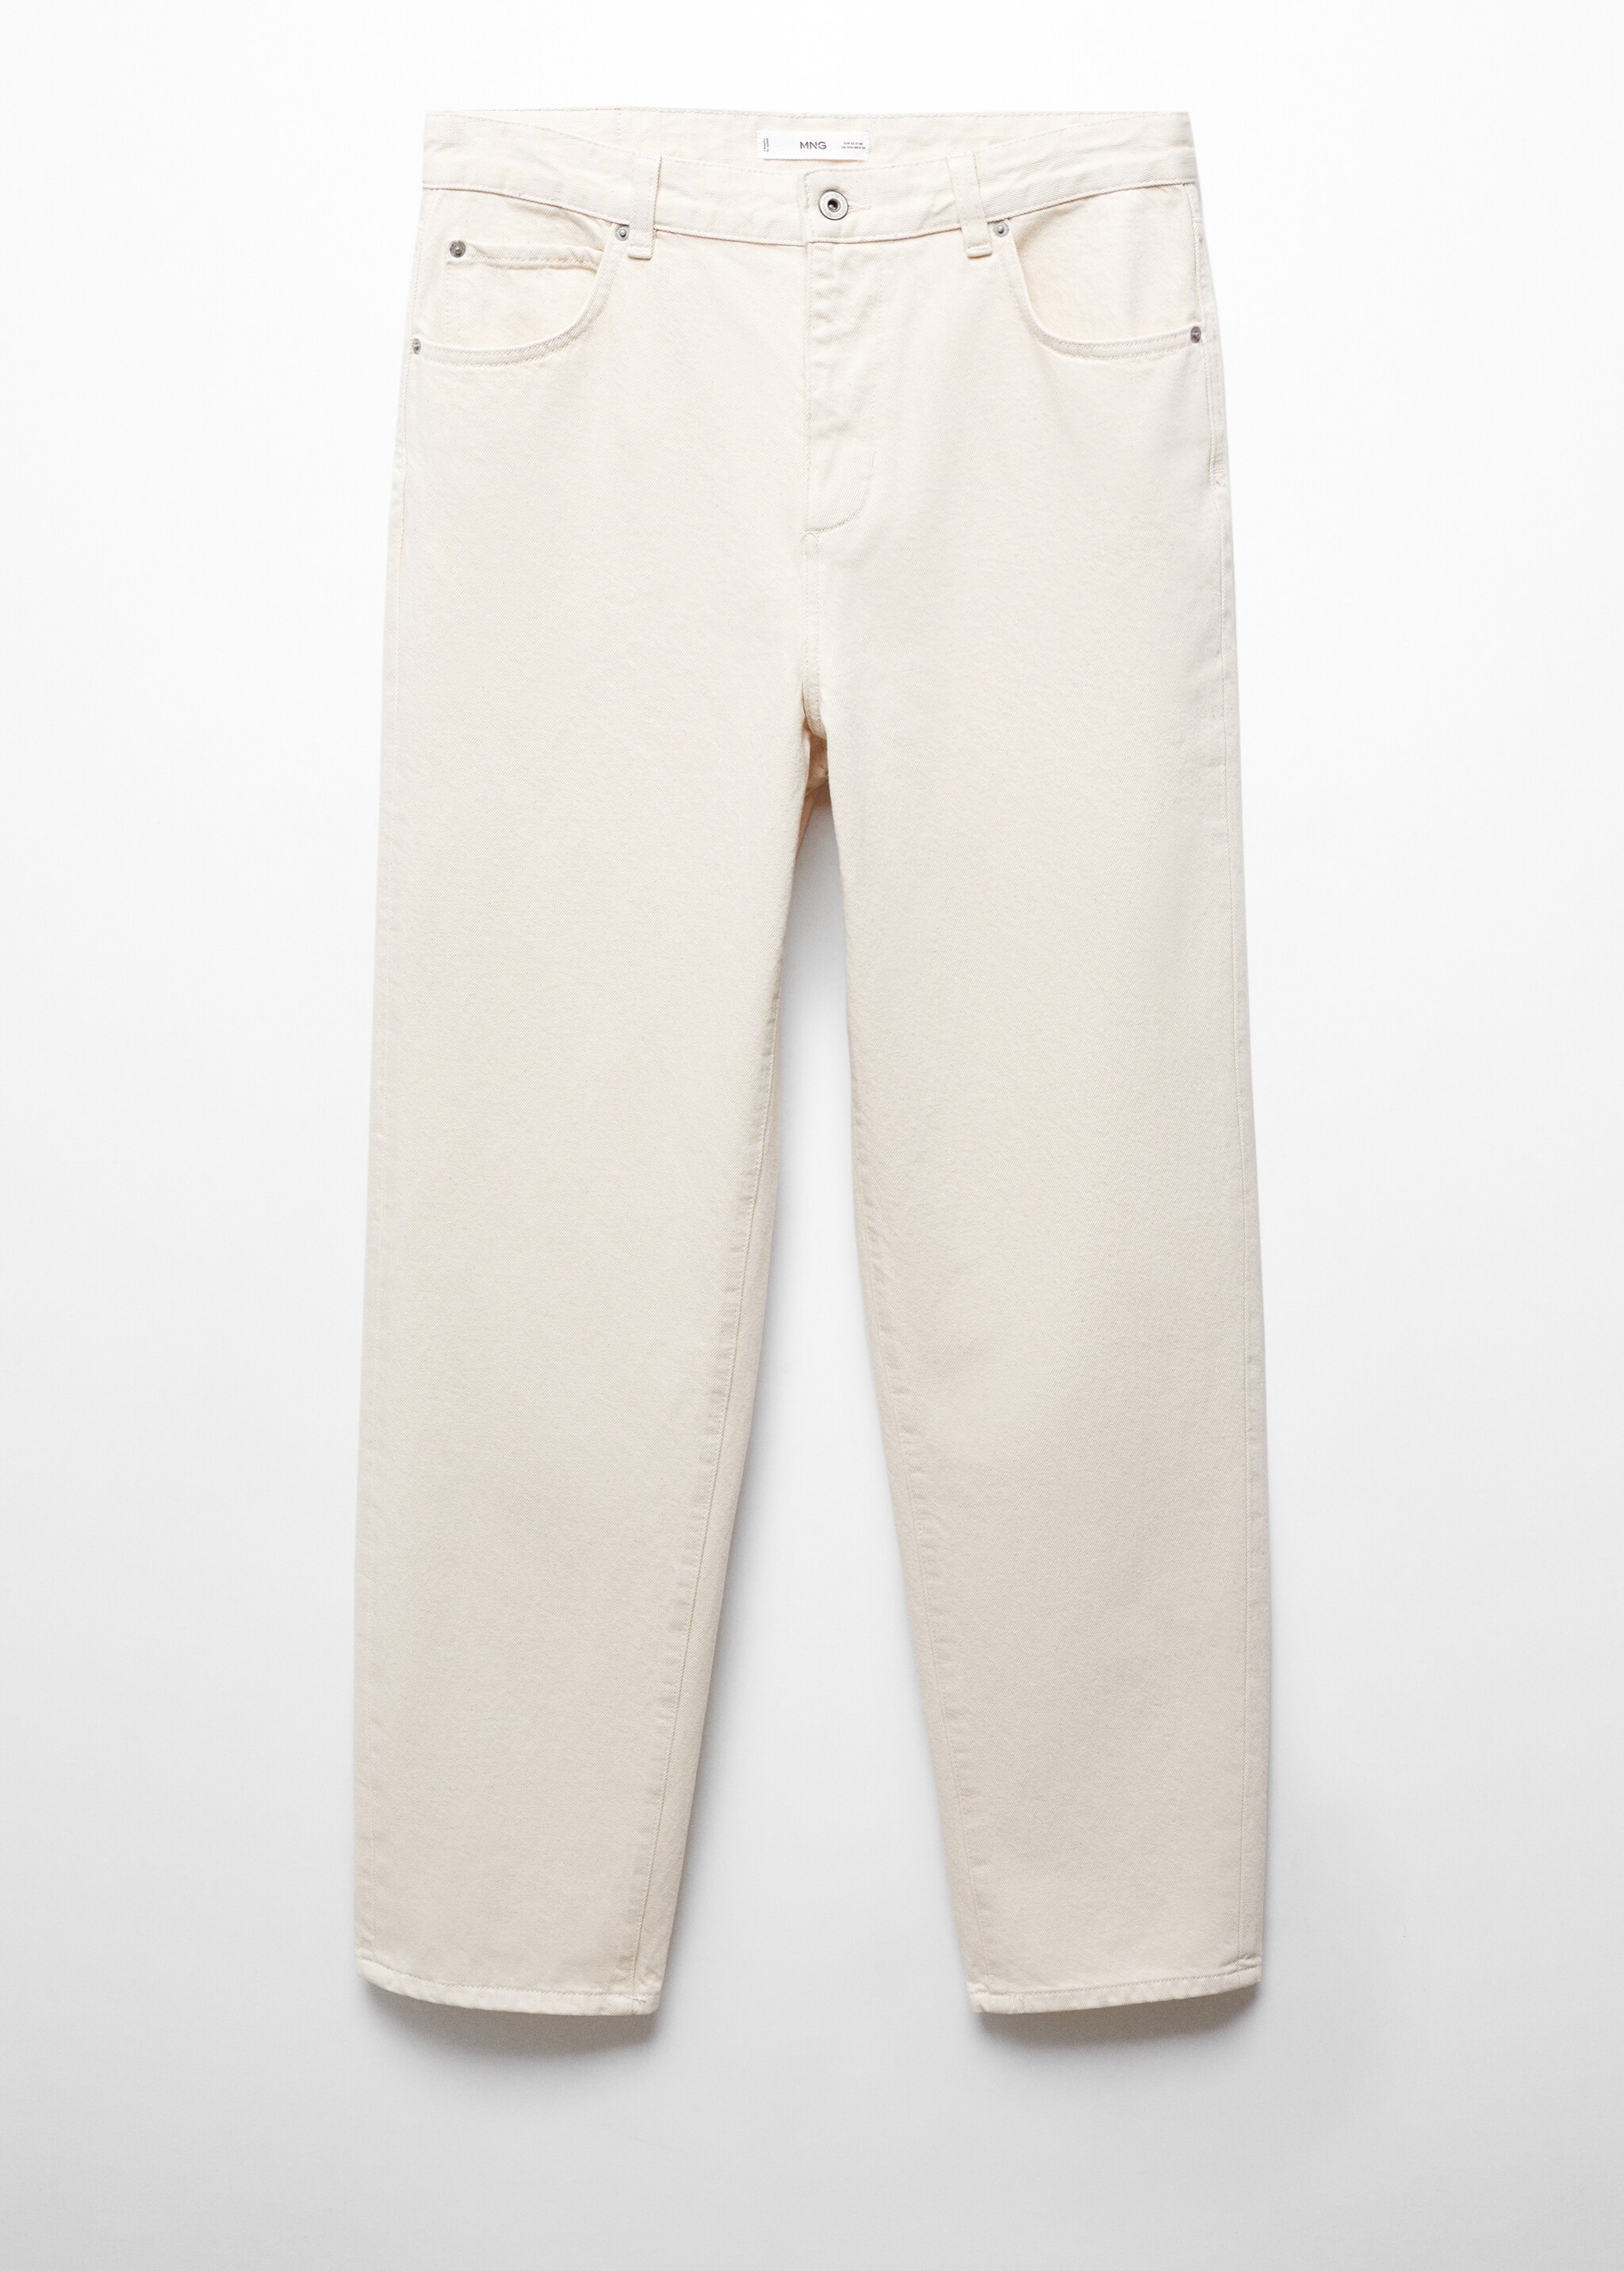 Relaxed fit cotton jeans - Article without model